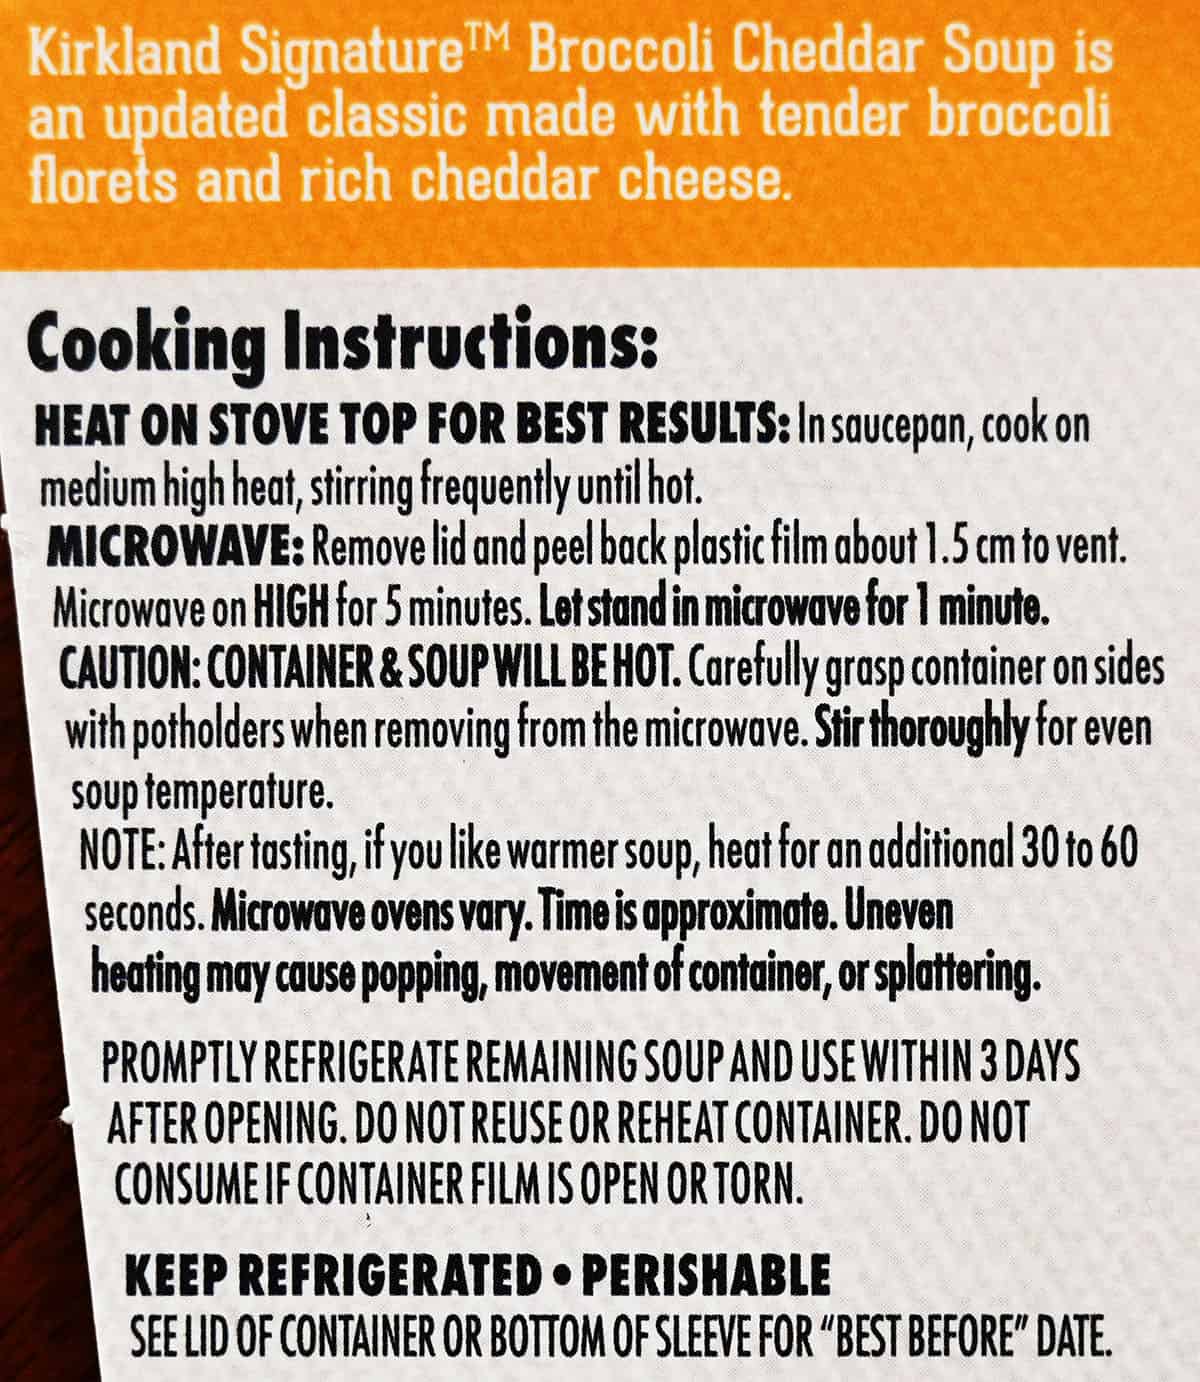 Image of the Kirkland Signature broccoli cheddar soup cooking instructions from the package.